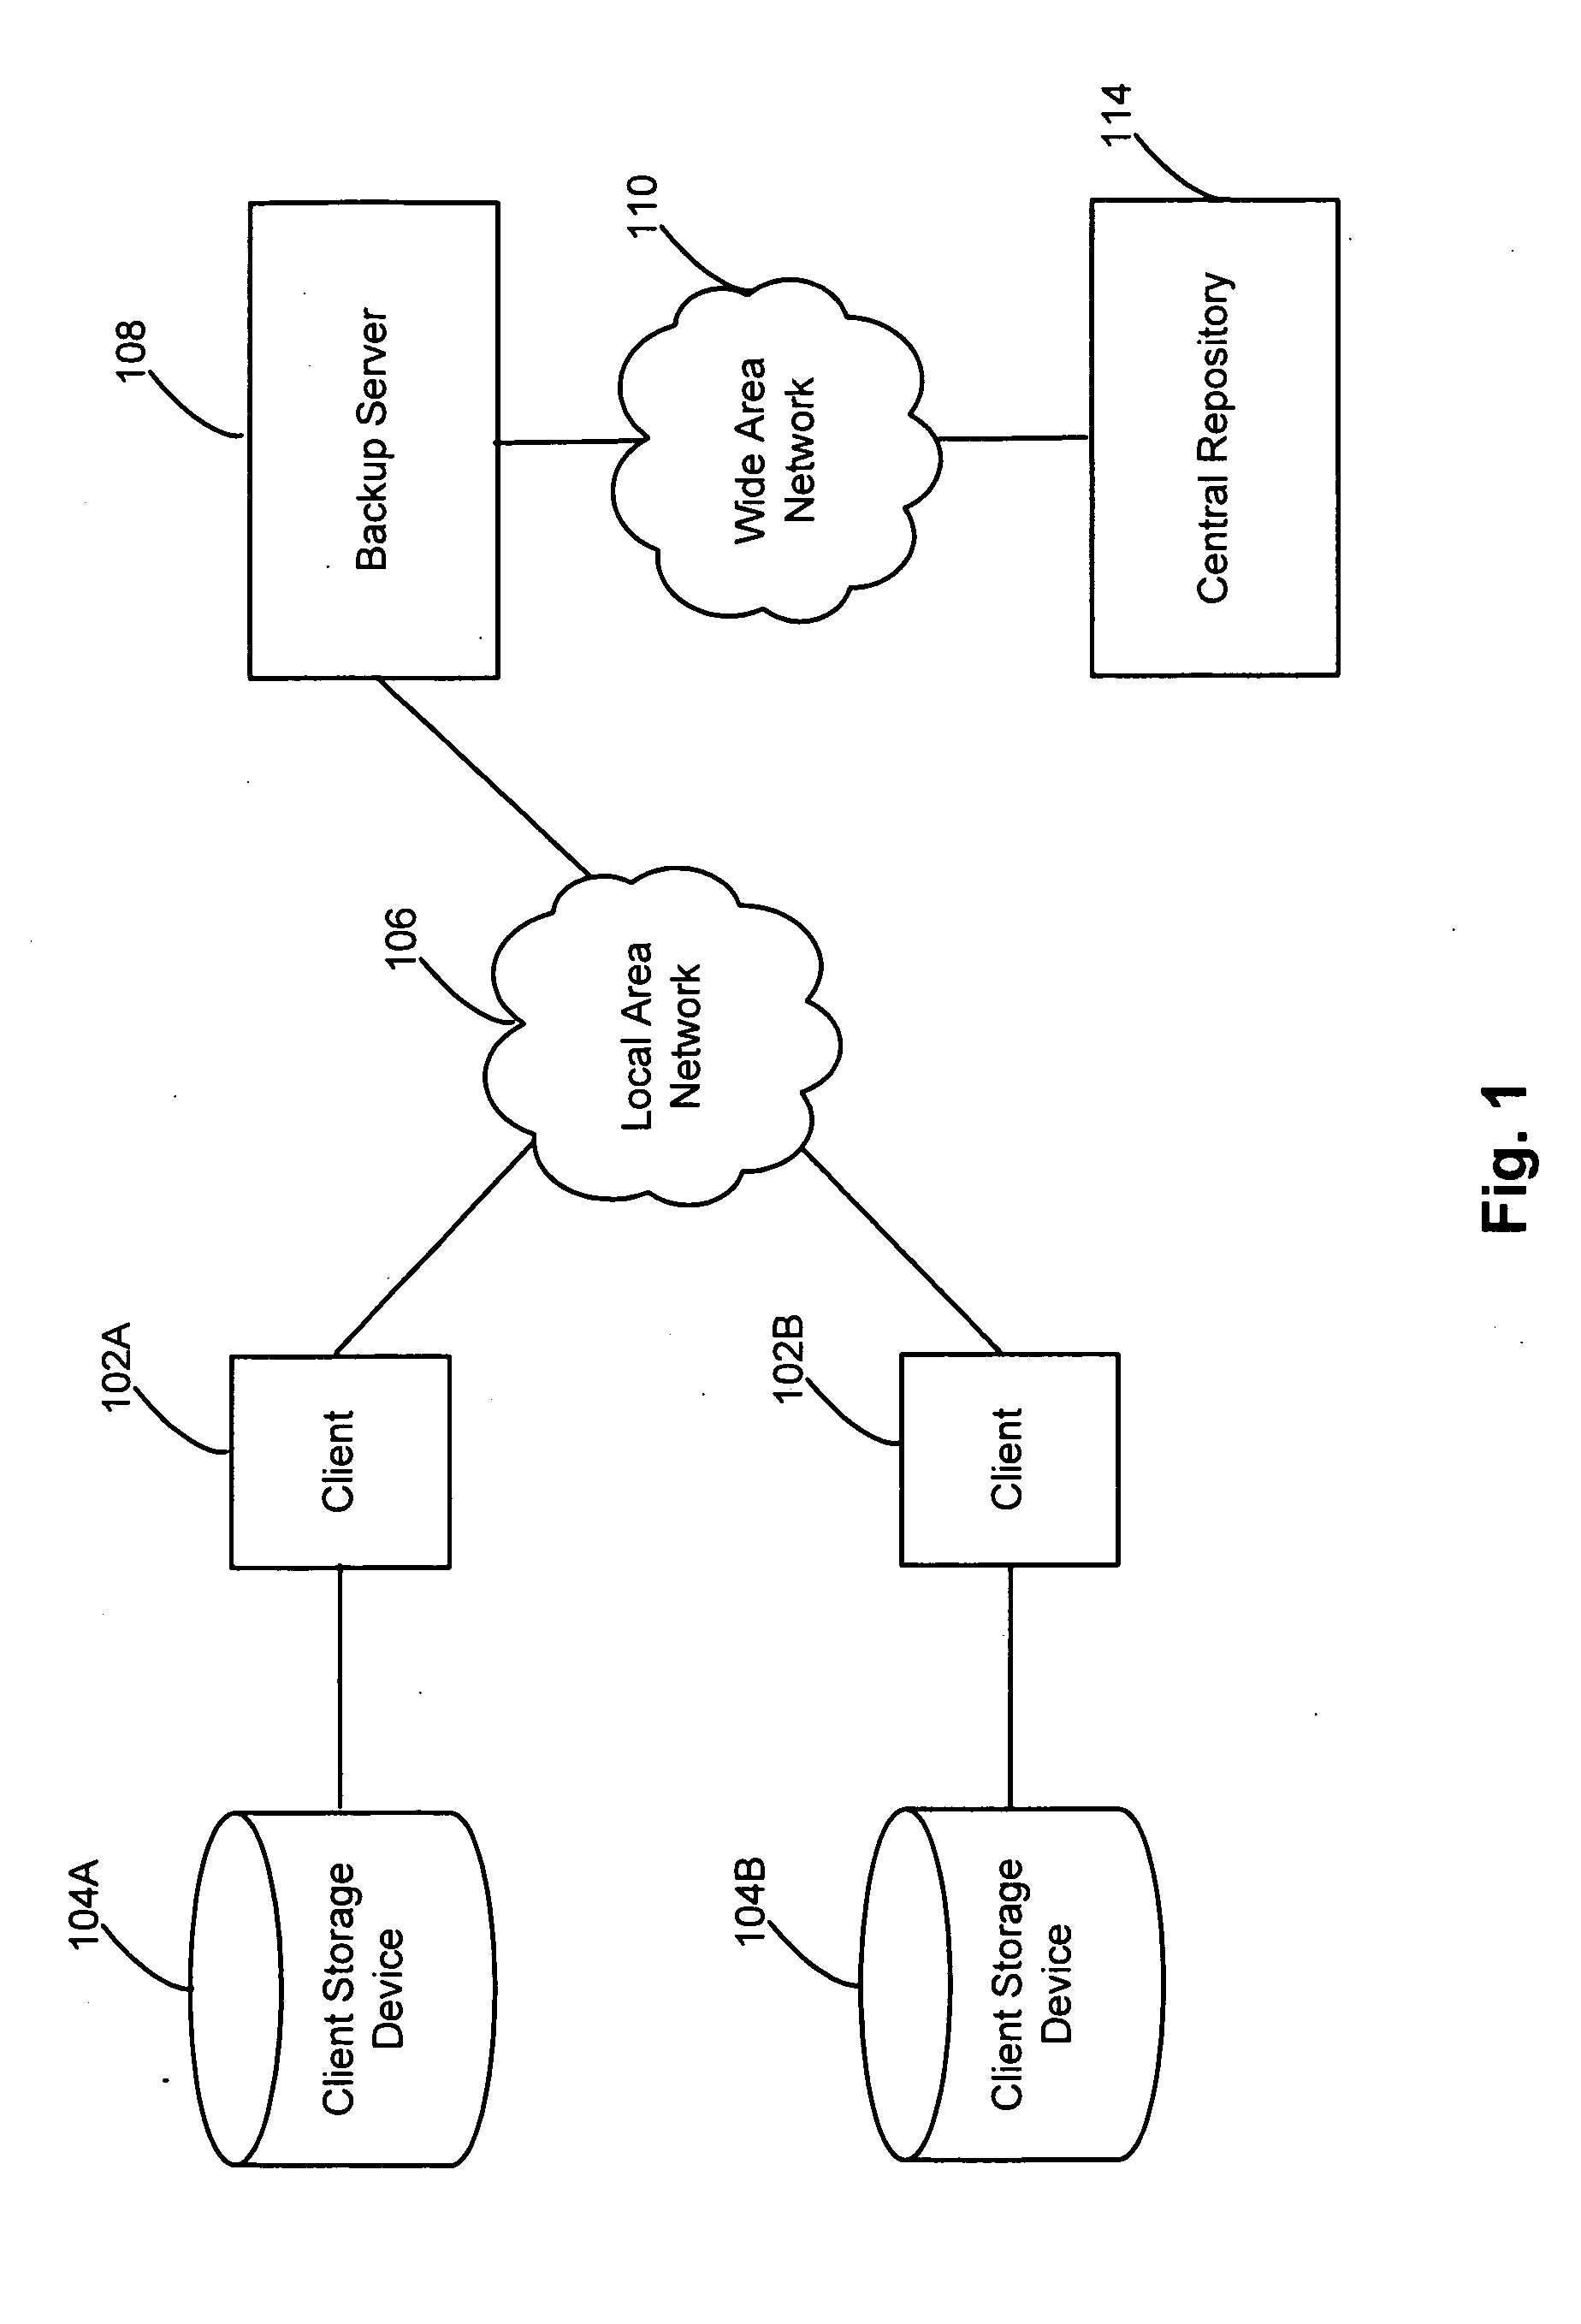 Source Classification For Performing Deduplication In A Backup Operation